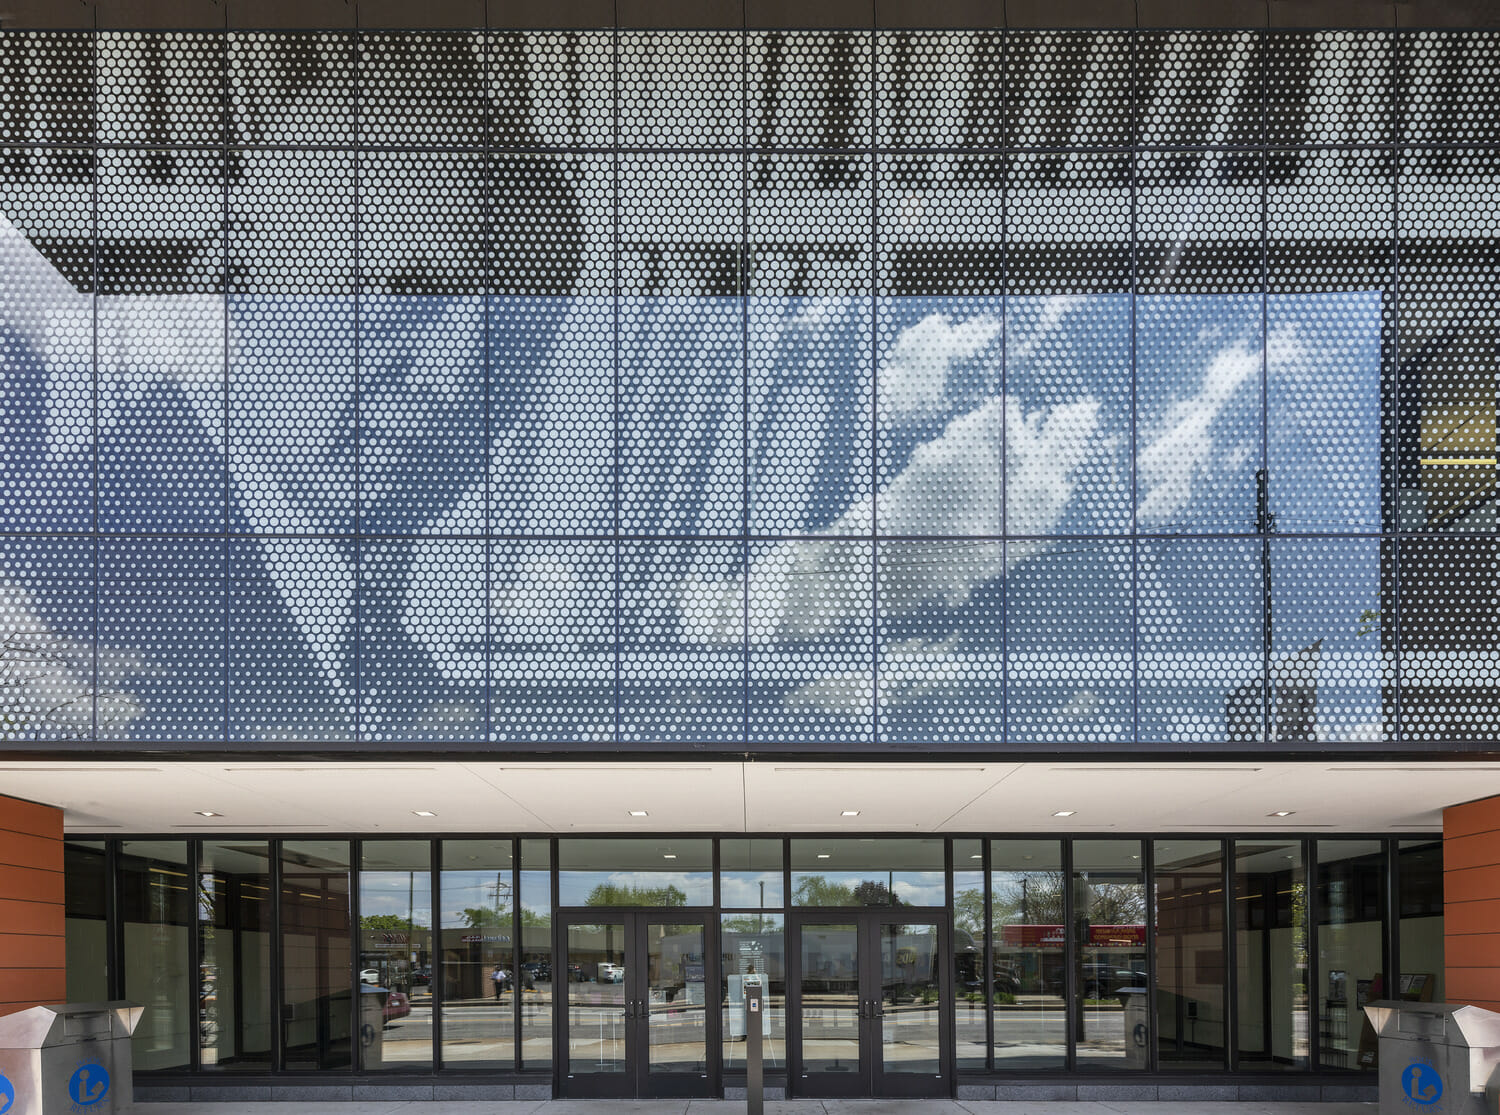 A building with a glass facade and a picture of a man.